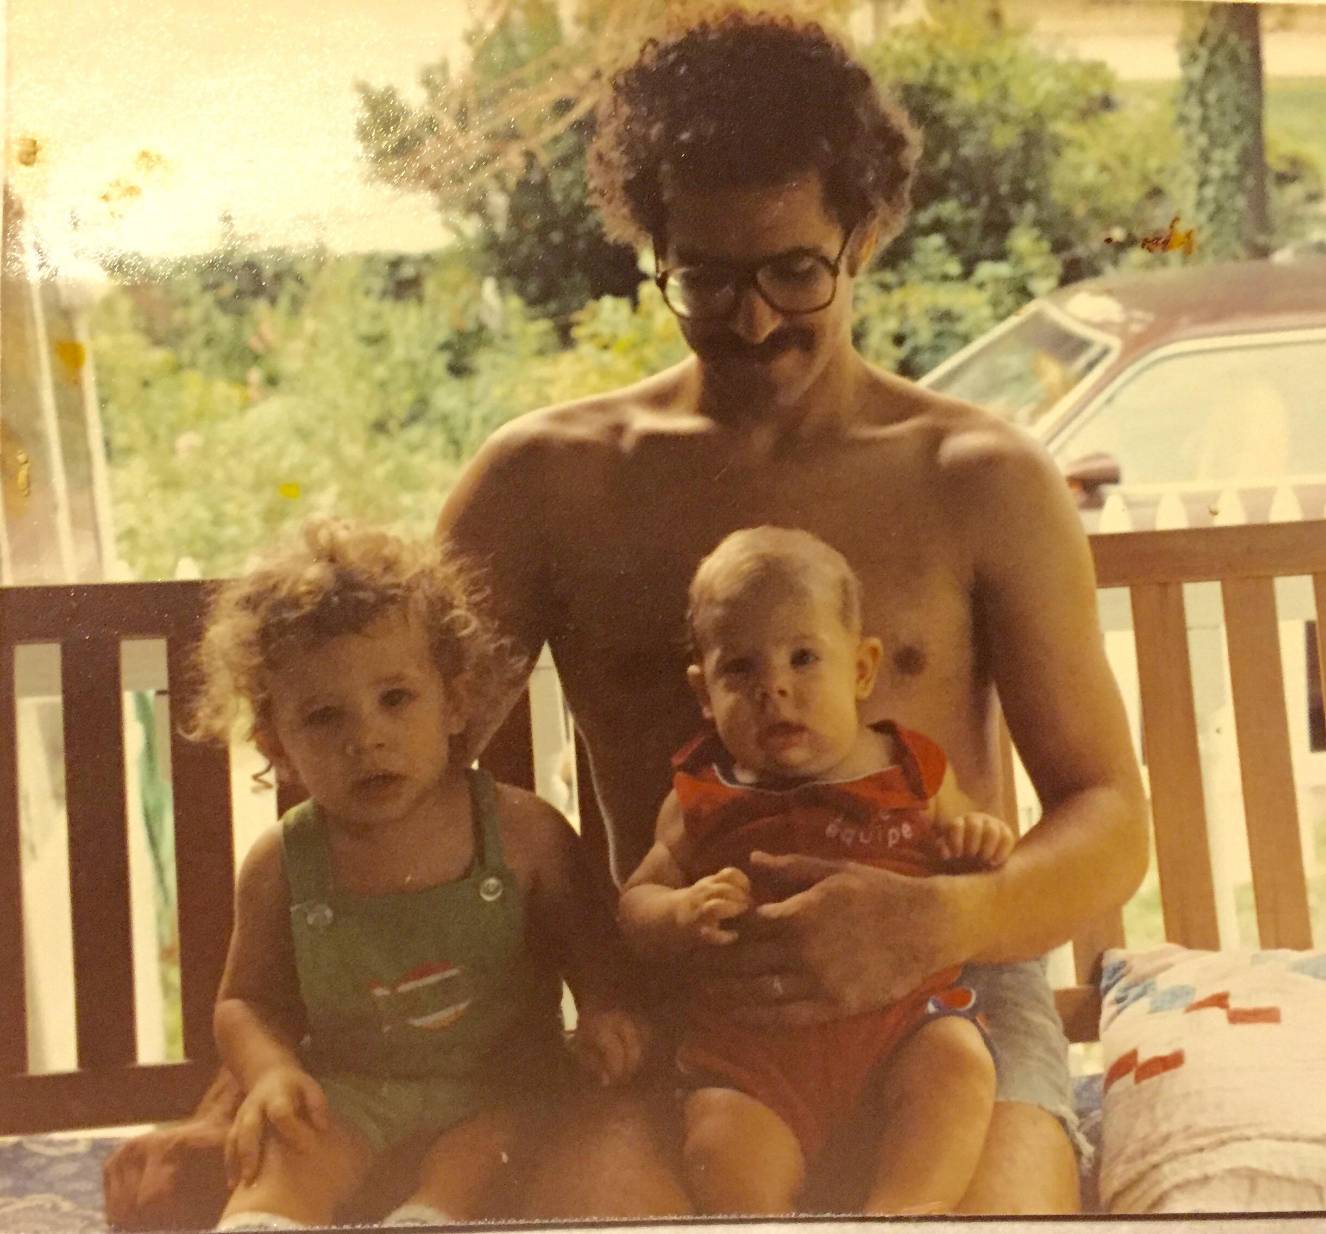 Dan, Matt & Nate on front porch on Dill Road, South Euclid, OH in the summer of 1981.